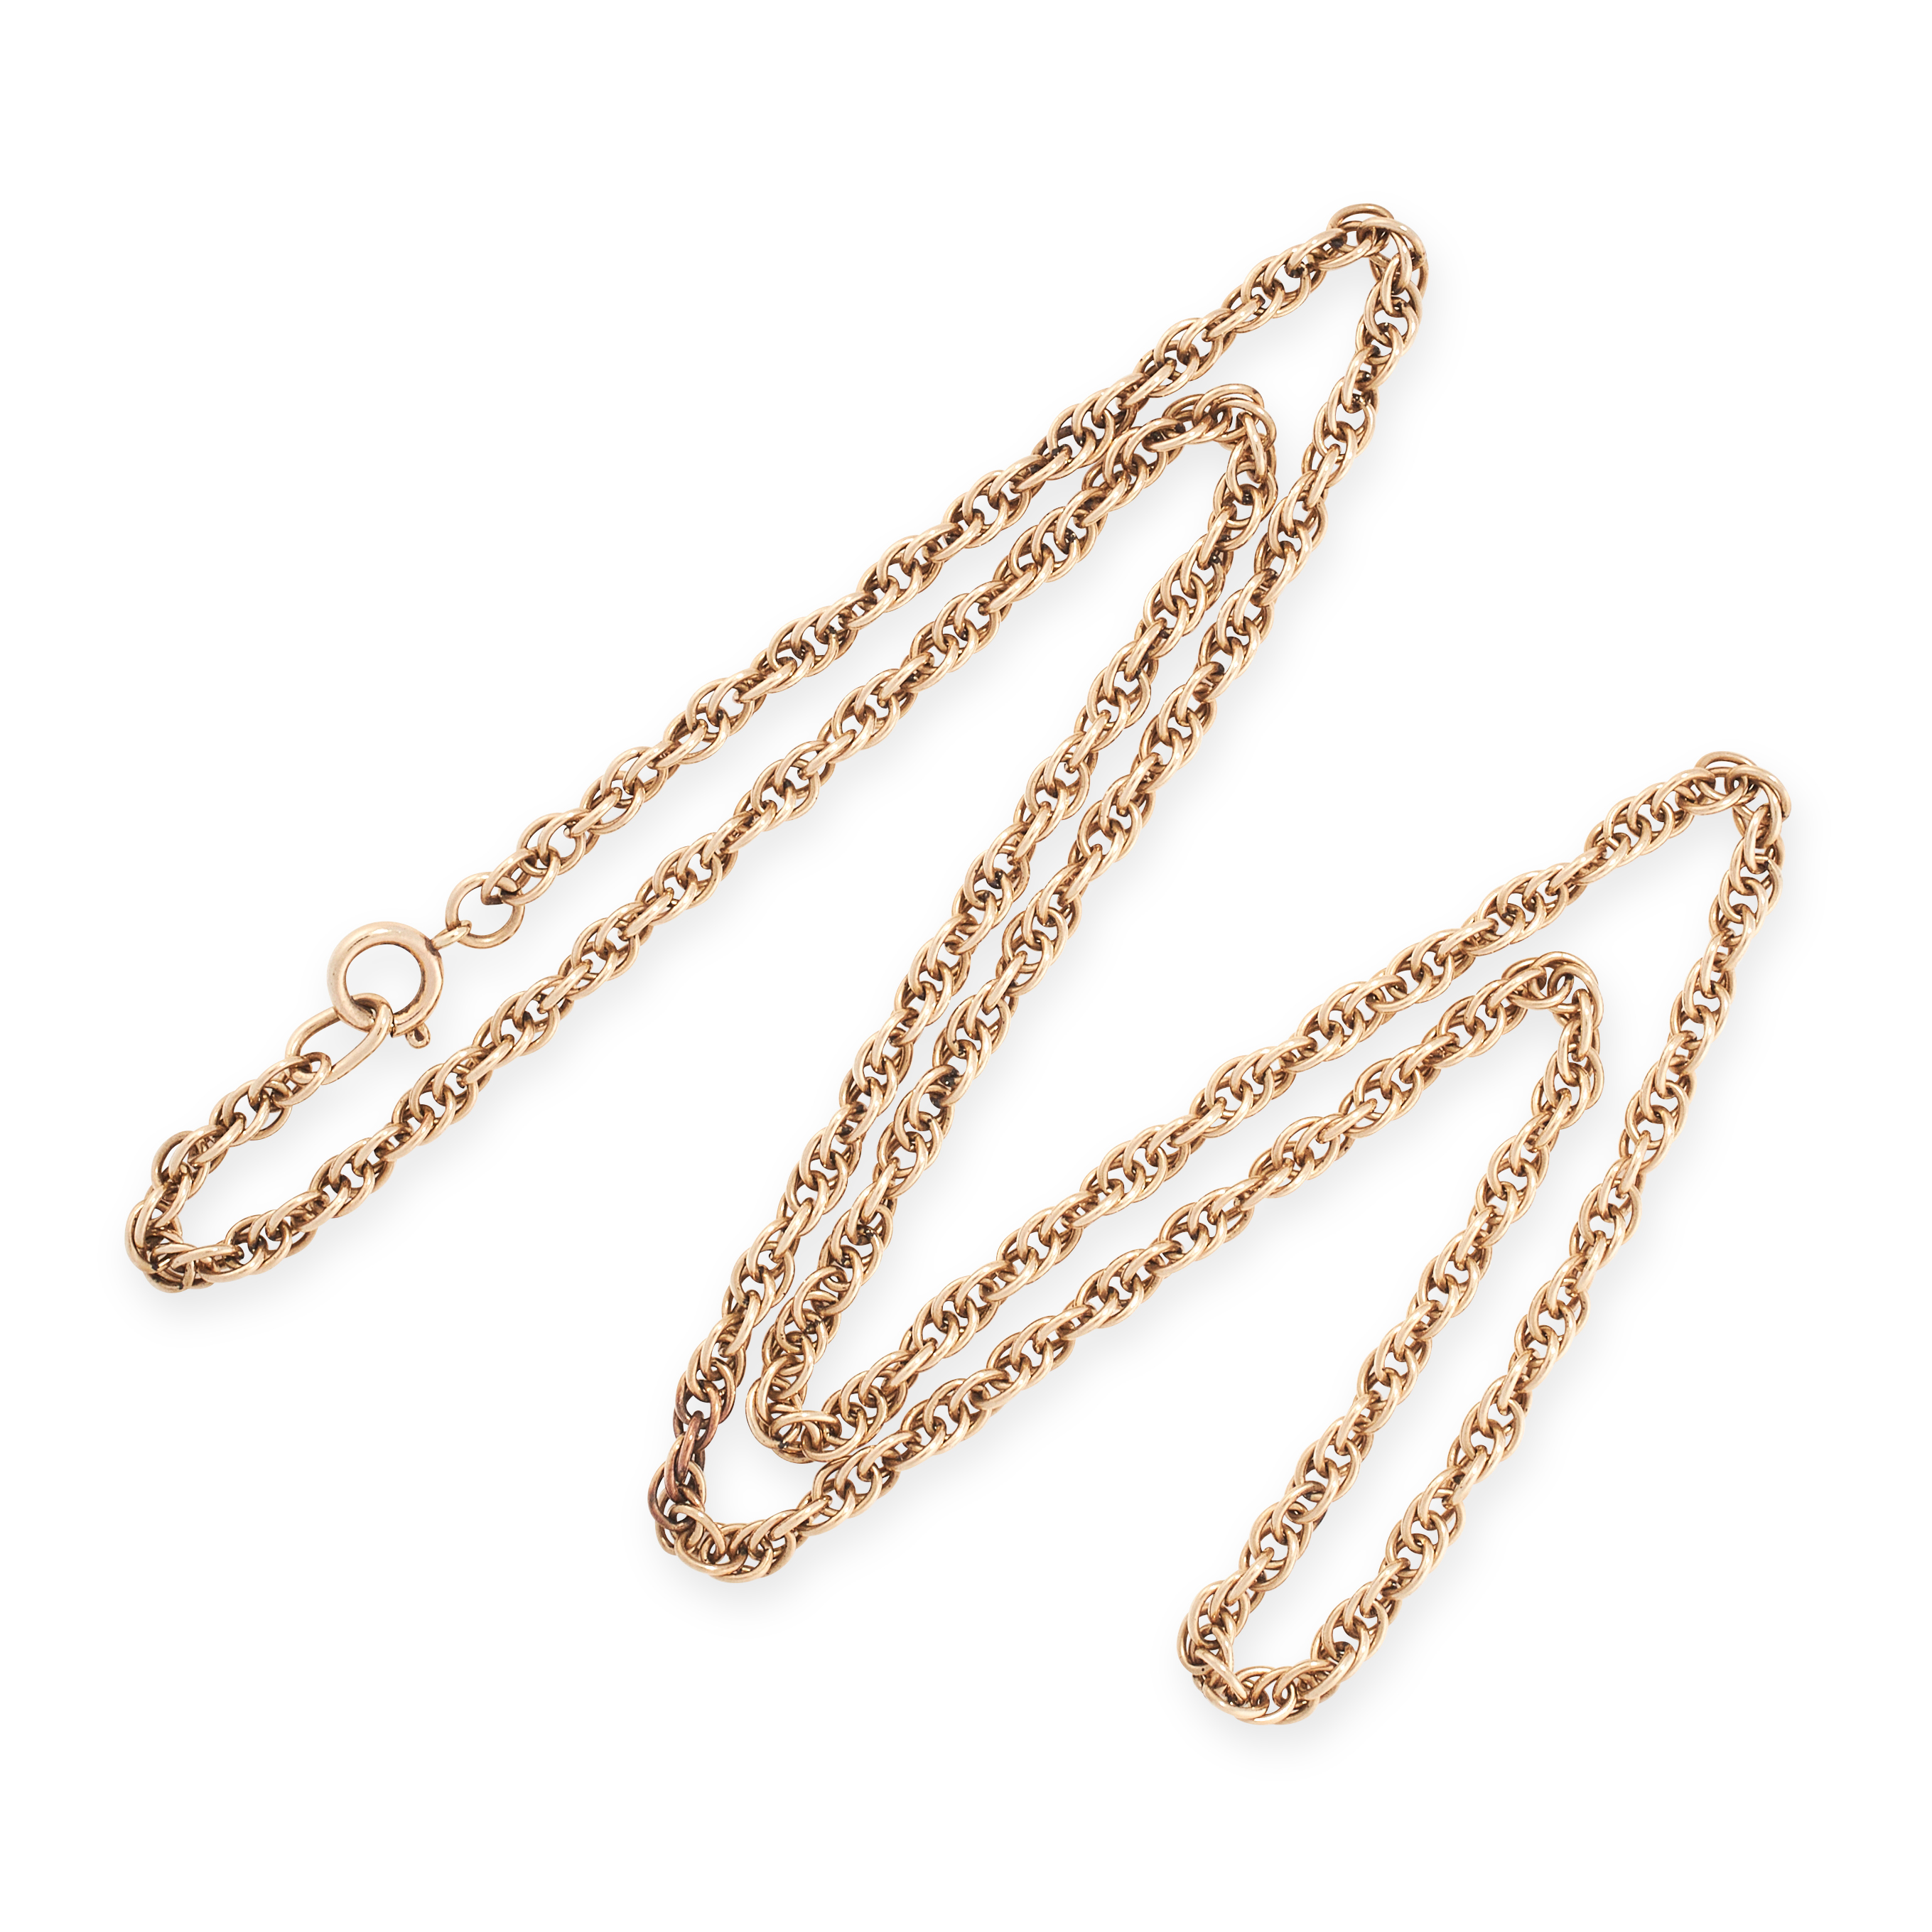 A VINTAGE FANCY LINK CHAIN NECKLACE in yellow gold, comprising a single row of twisted